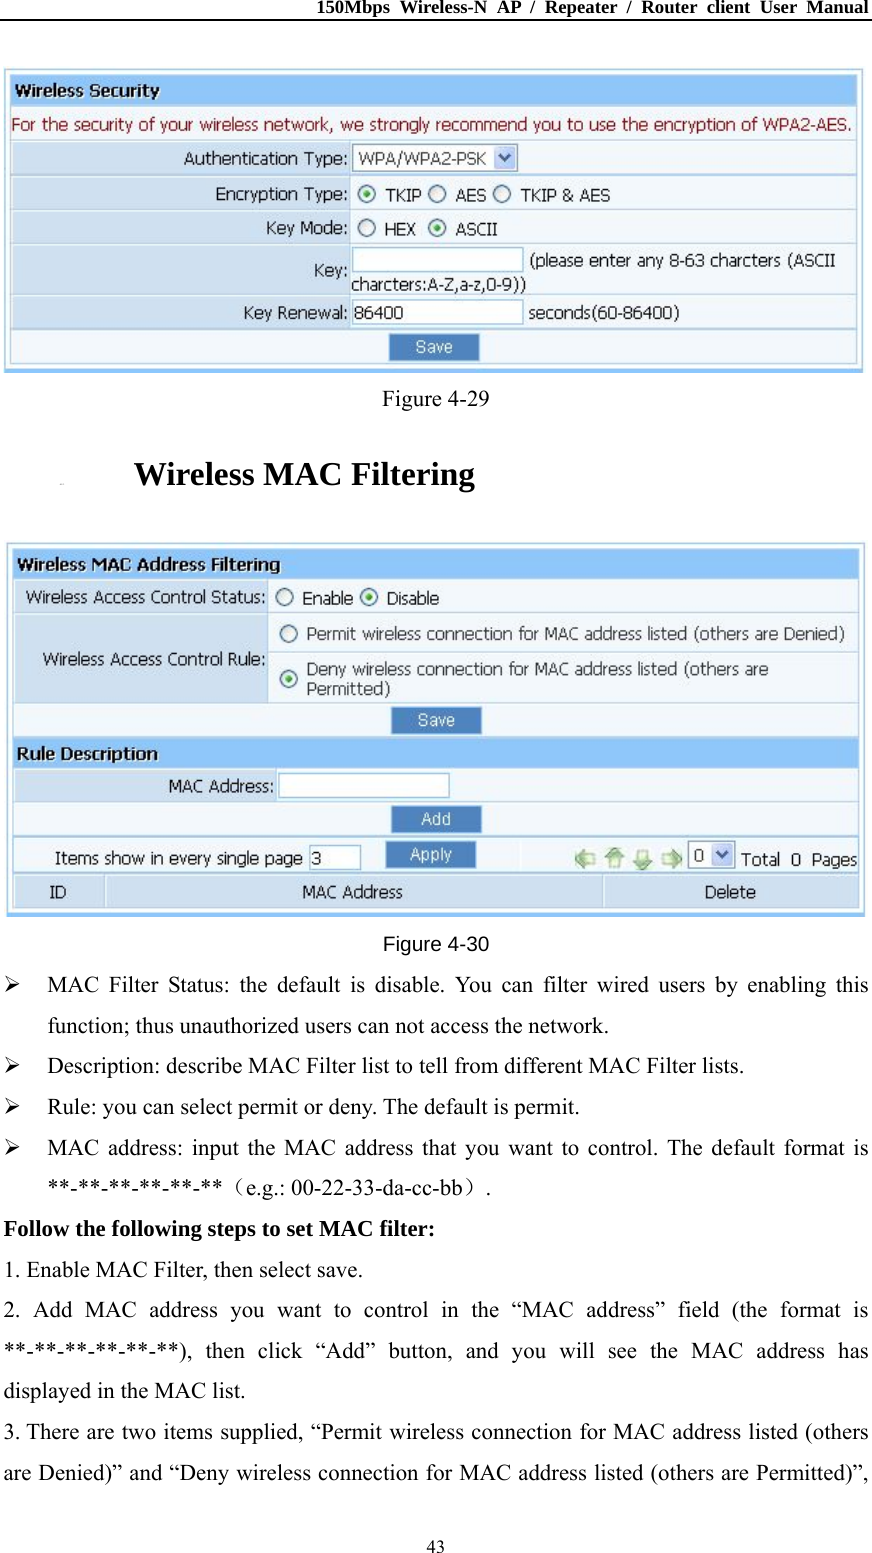 150Mbps Wireless-N AP / Repeater / Router client User Manual  43 Figure 4-29 4.5.3. Wireless MAC Filtering  Figure 4-30  MAC Filter Status: the default is disable. You can filter wired users by enabling this function; thus unauthorized users can not access the network.  Description: describe MAC Filter list to tell from different MAC Filter lists.  Rule: you can select permit or deny. The default is permit.  MAC address: input the MAC address that you want to control. The default format is **-**-**-**-**-**（e.g.: 00-22-33-da-cc-bb）. Follow the following steps to set MAC filter:   1. Enable MAC Filter, then select save. 2. Add MAC address you want to control in the “MAC address” field (the format is **-**-**-**-**-**), then click “Add” button, and you will see the MAC address has displayed in the MAC list. 3. There are two items supplied, “Permit wireless connection for MAC address listed (others are Denied)” and “Deny wireless connection for MAC address listed (others are Permitted)”, 